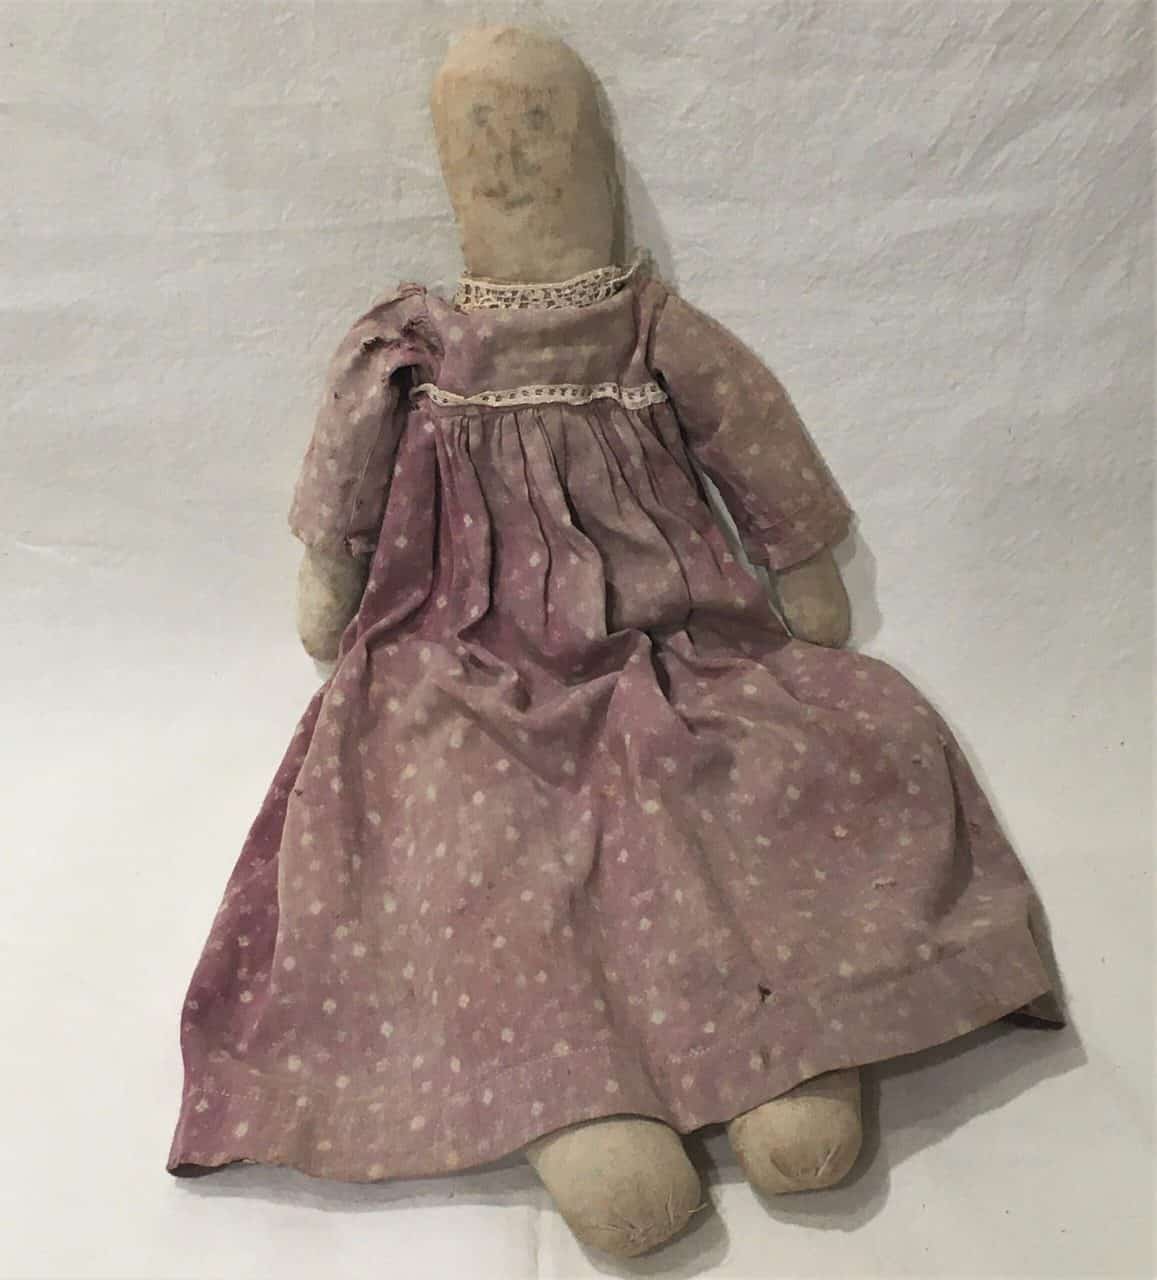 Much-loved doll stuffed with rags.